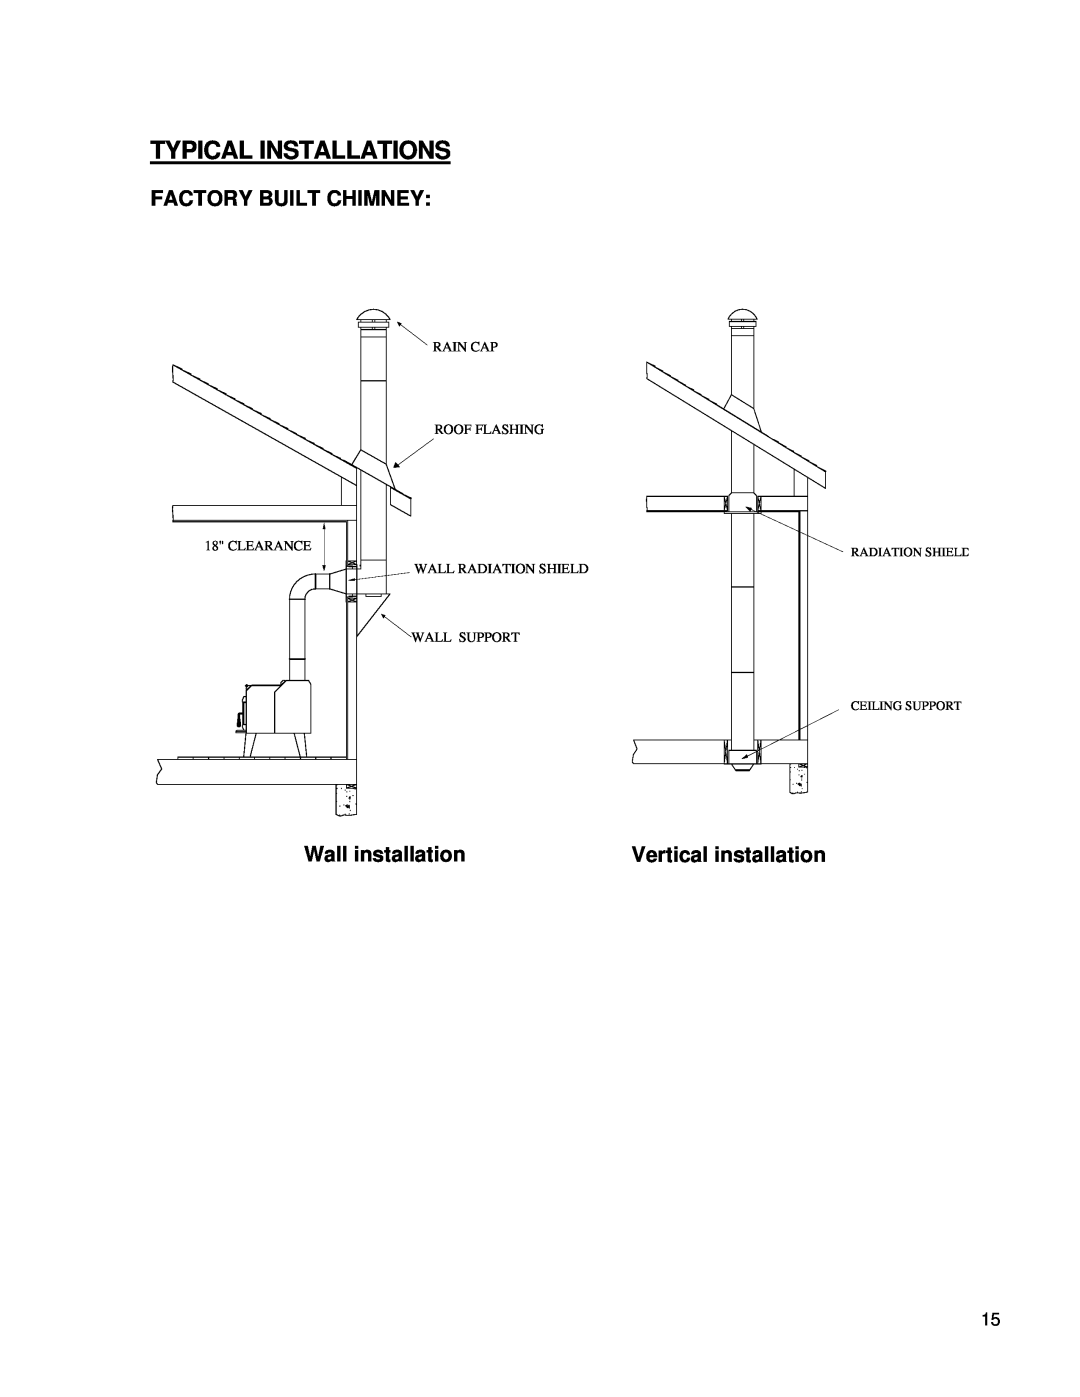 Drolet 58991 owner manual Typical Installations, Factory Built Chimney, Wall installation, Vertical installation, Clearance 